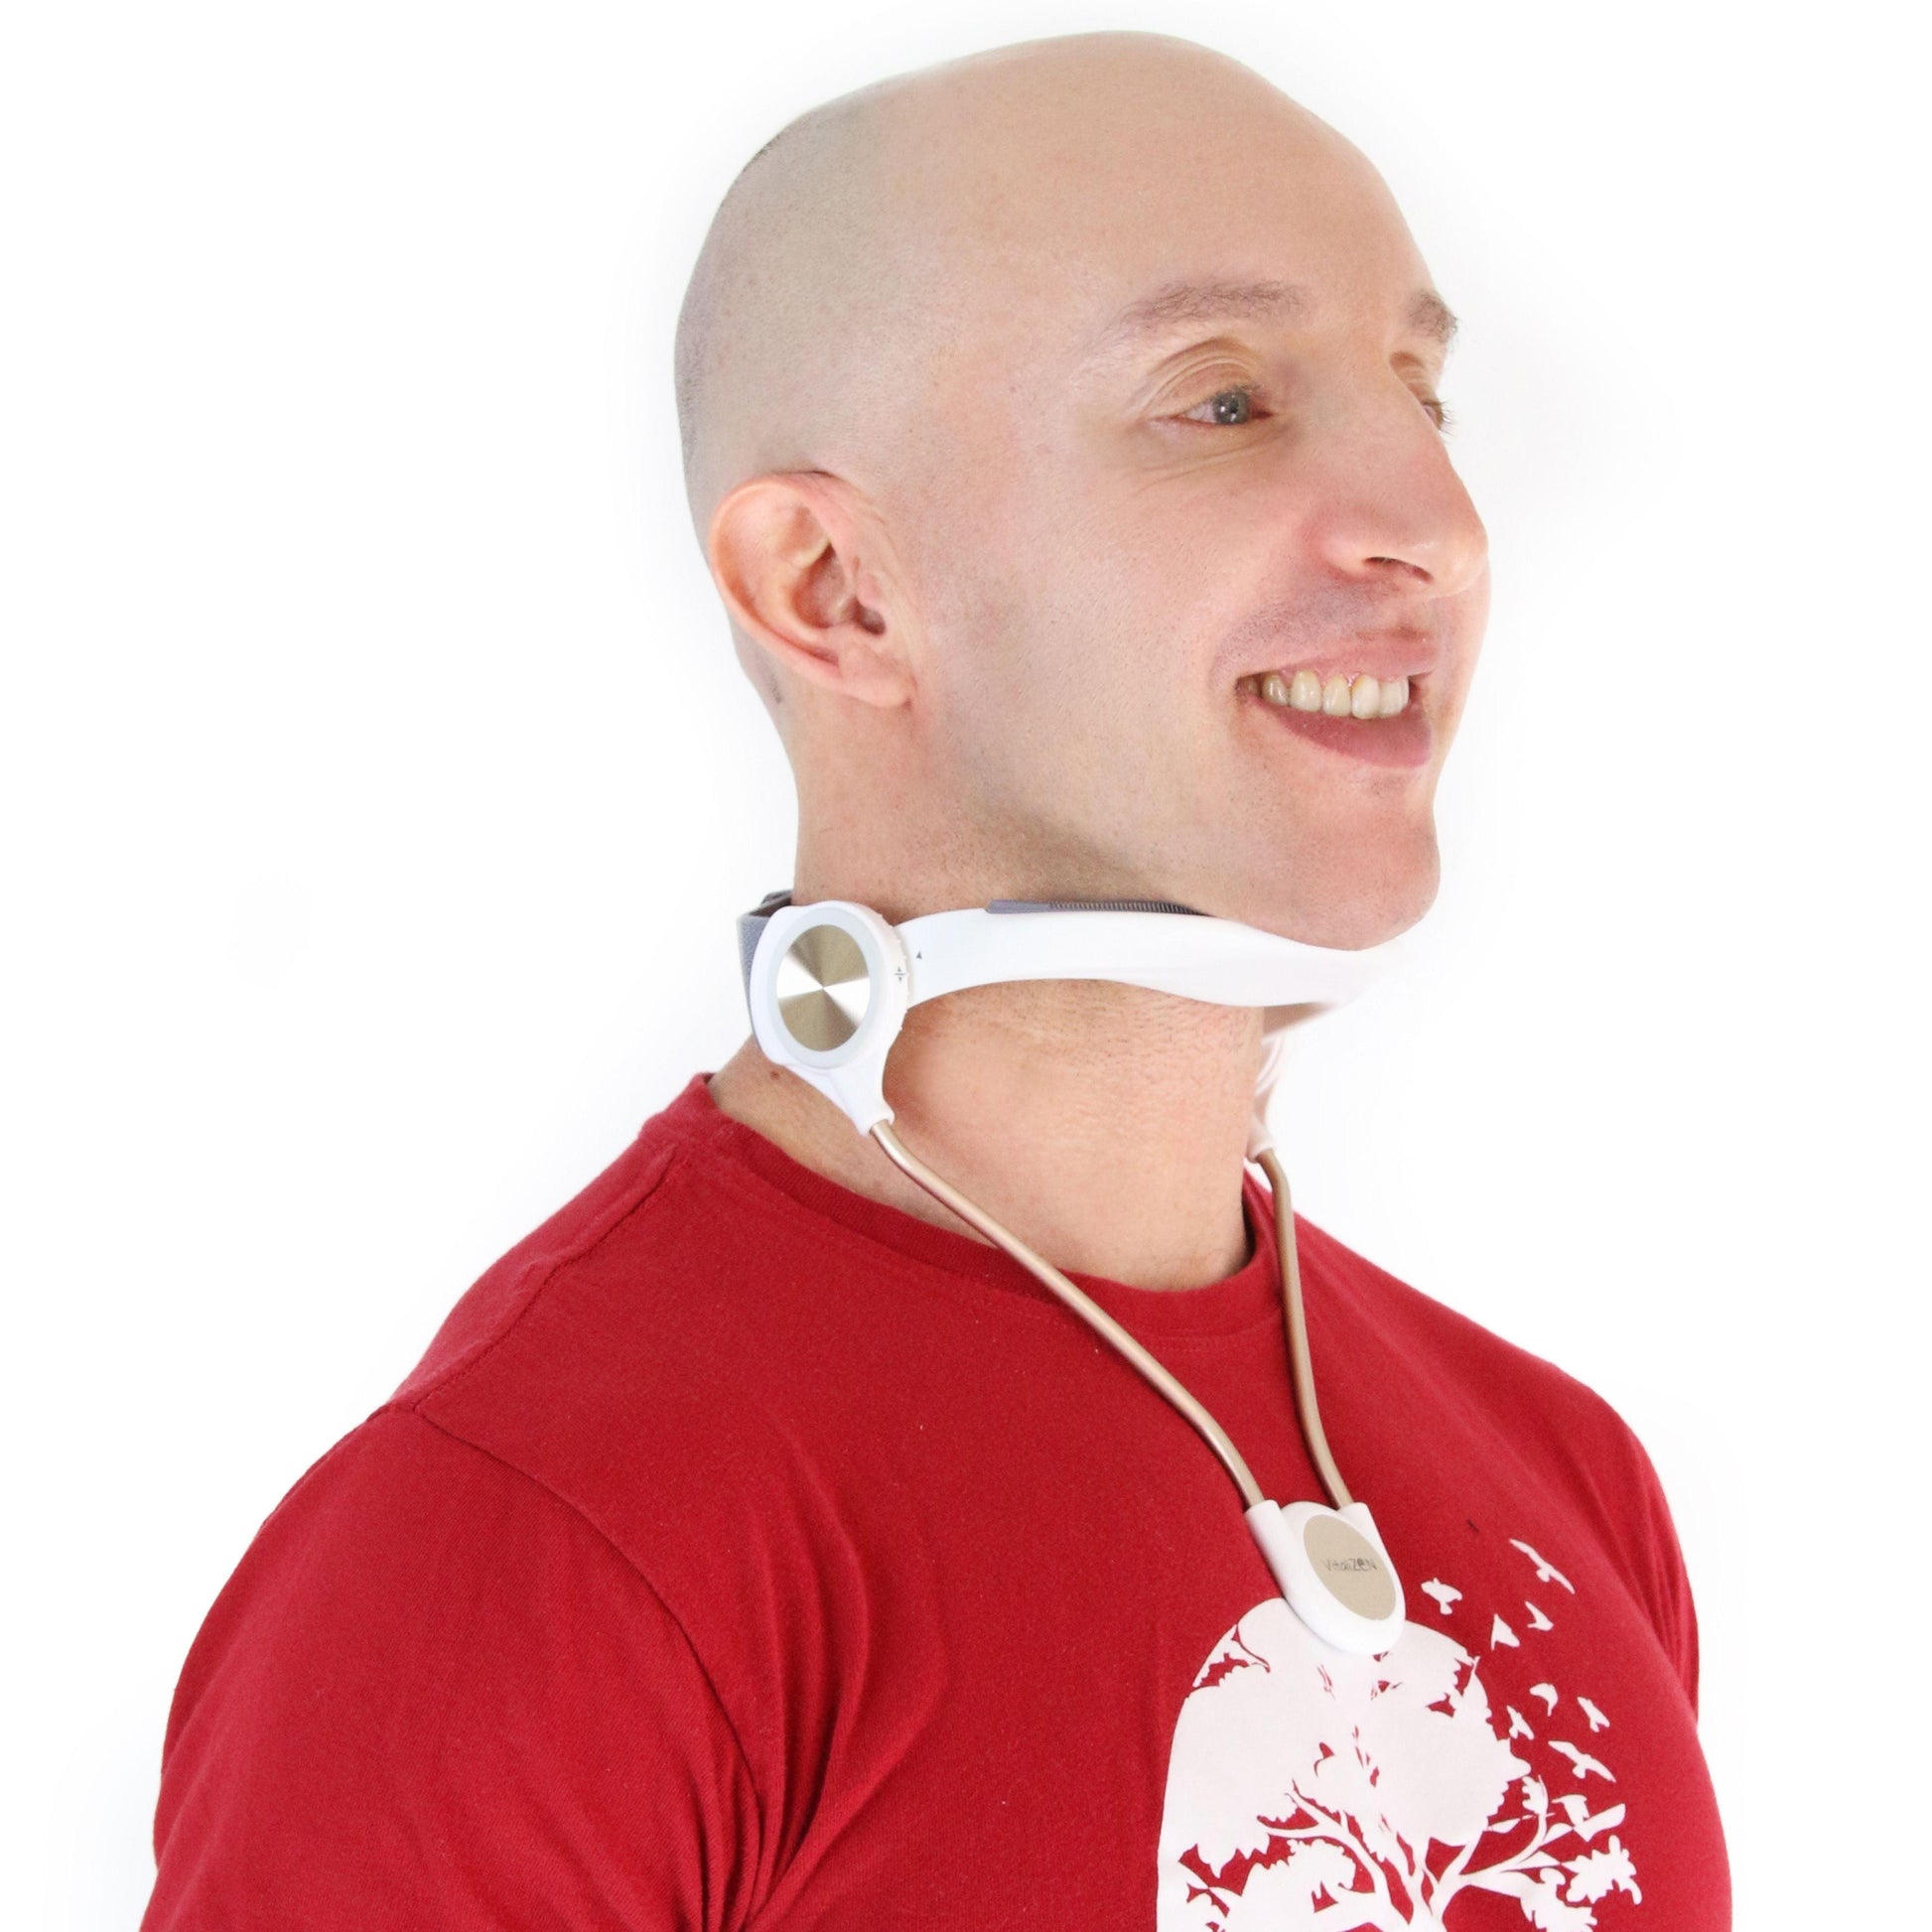 2022 New Neck Brace For Cervical Pain Relief, Fully Adjustable, Portable, Lightweight, Breathable Neck Collar - VitaliZEN